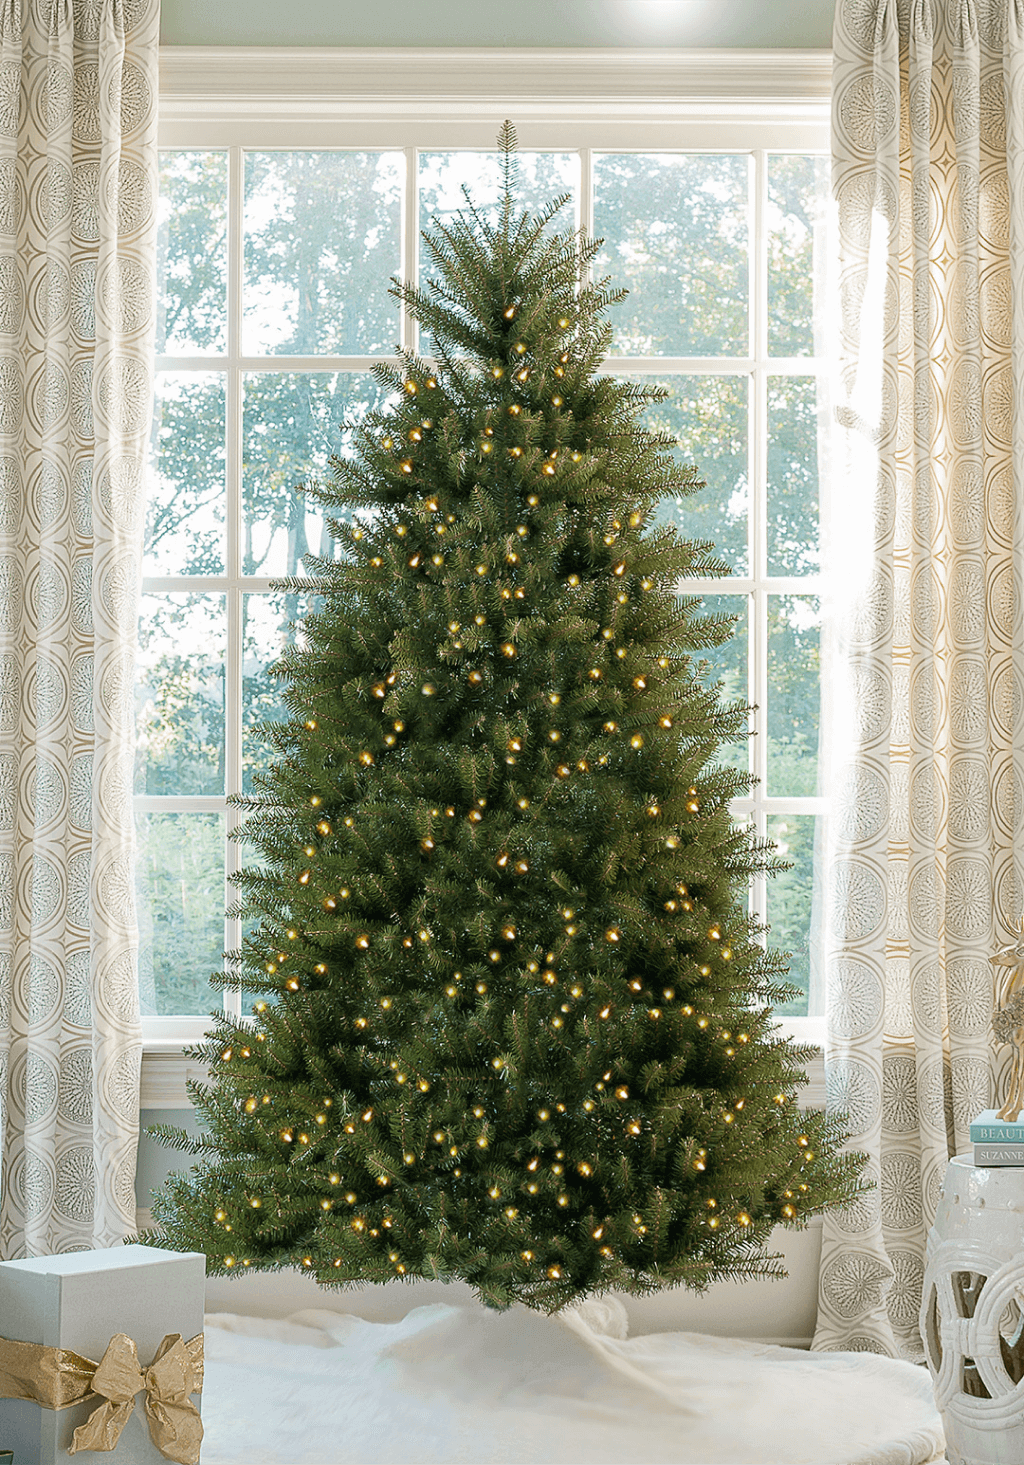 King of Christmas 9' Yorkshire Fir Artificial Christmas Tree with 850 Warm White LED Lights